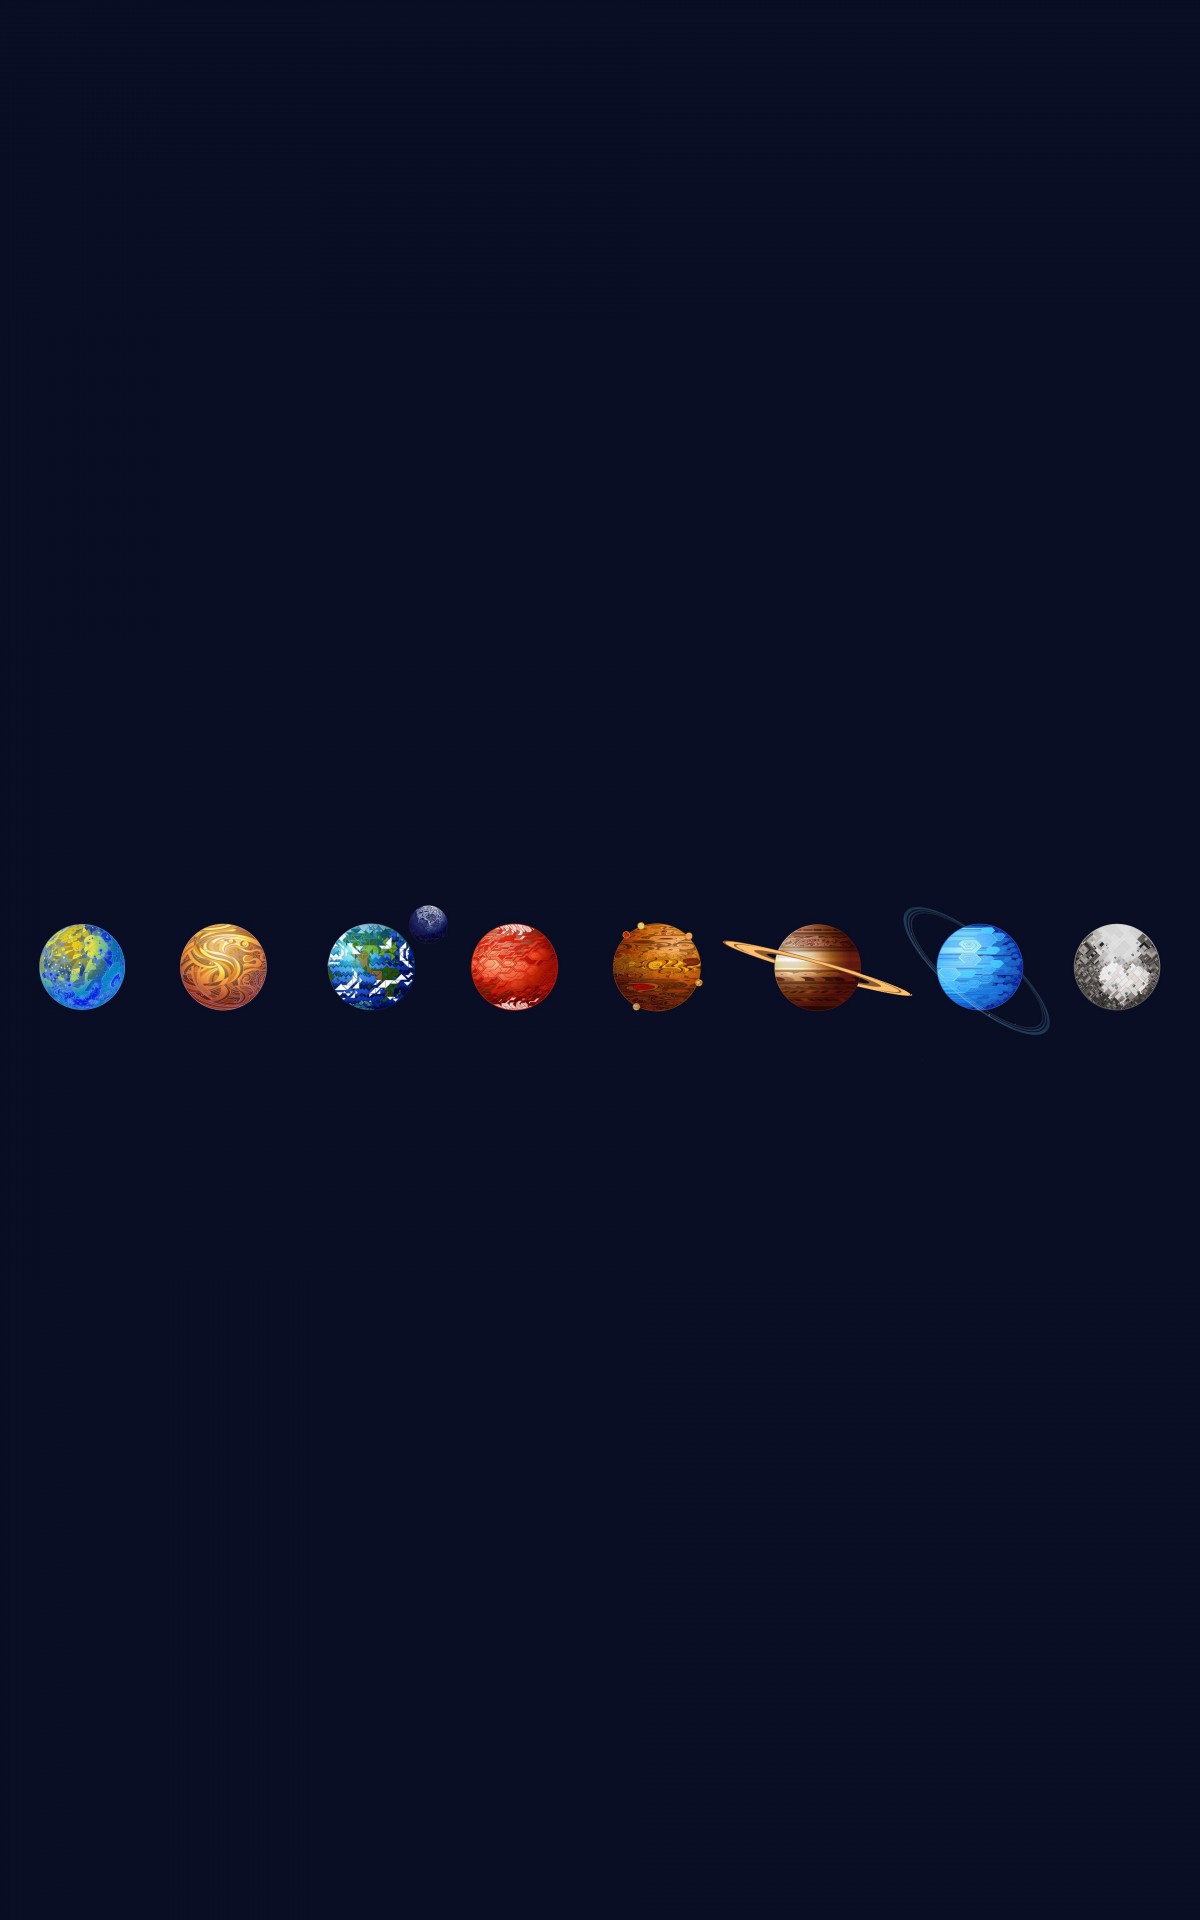 Solar System Wallpaper for Amazon Kindle Fire HDX